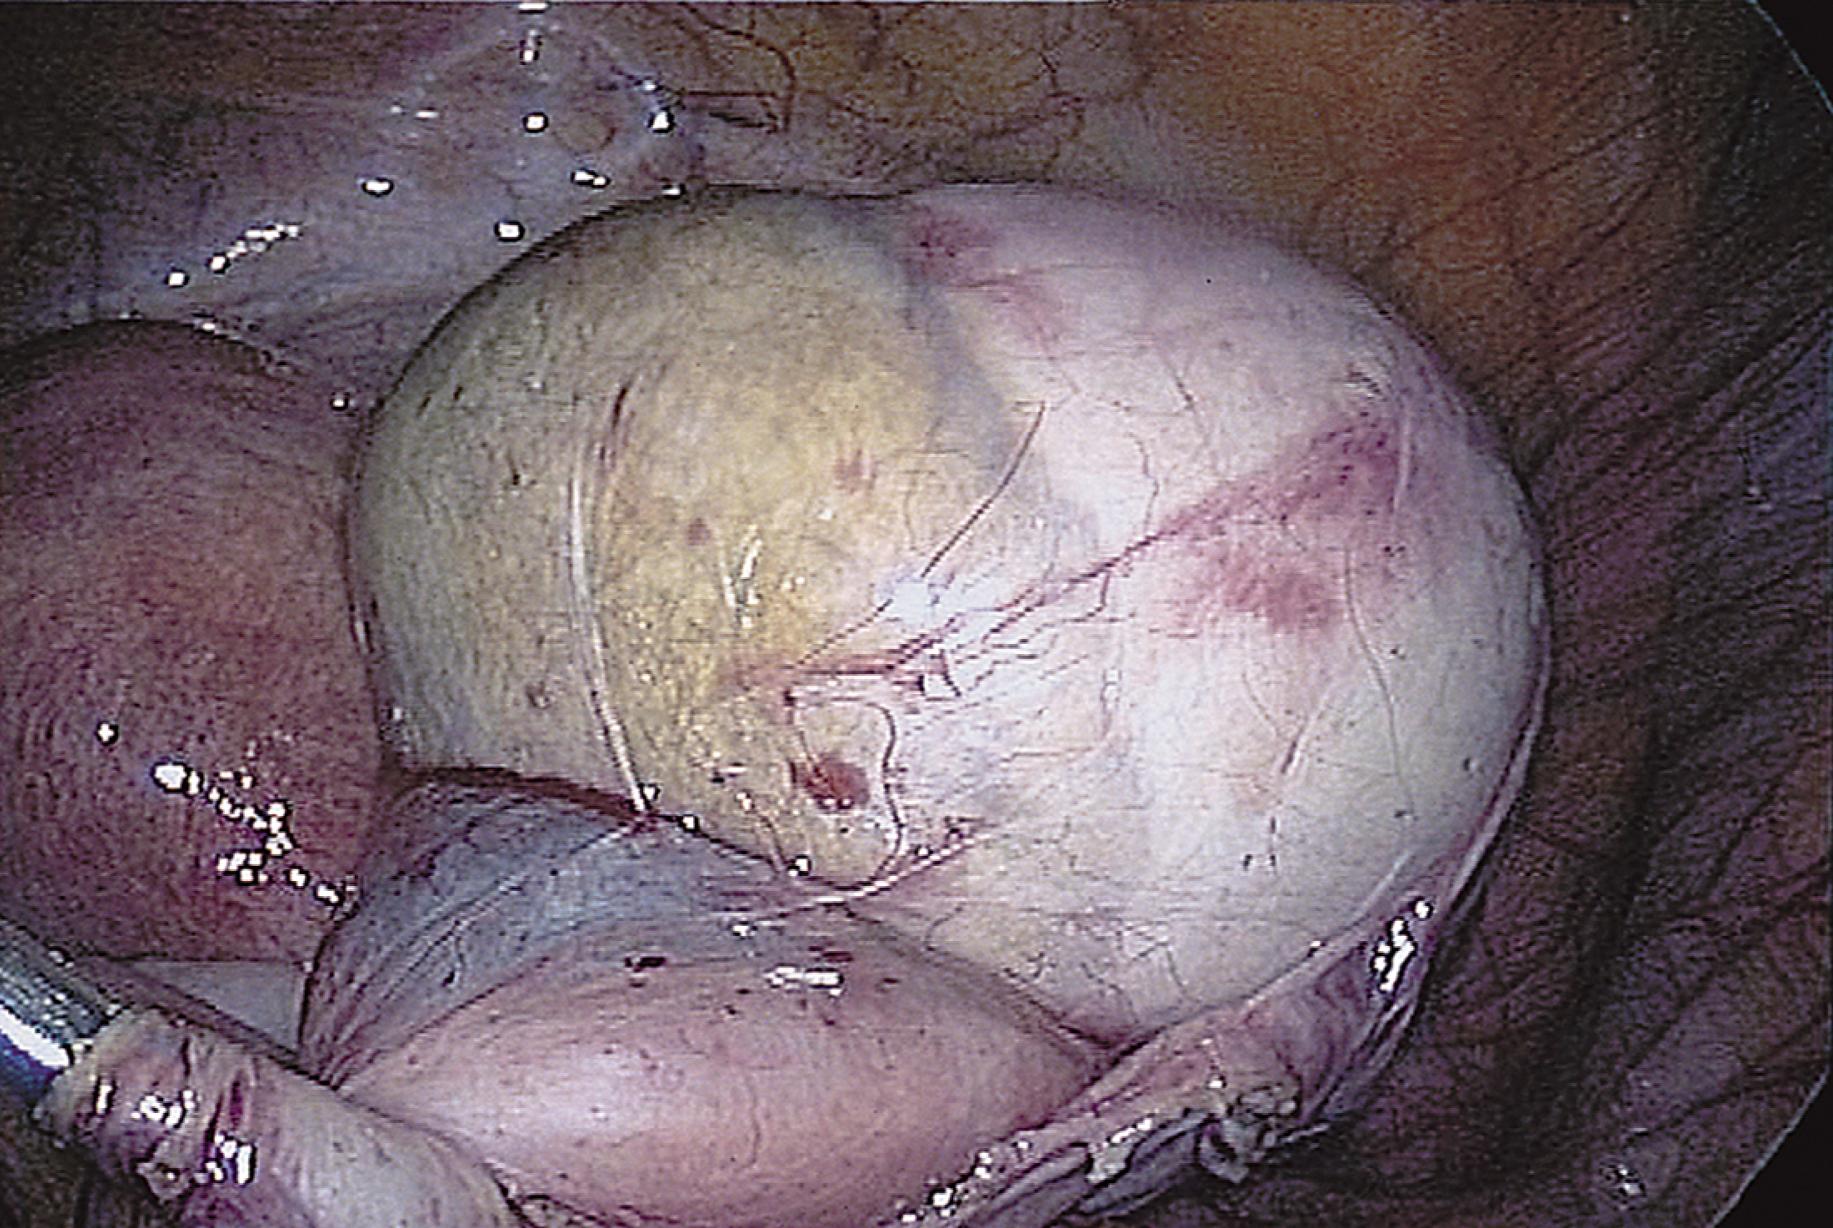 FIG. 115.3, The cyst is dissected from the ovary with a traction-countertraction technique.